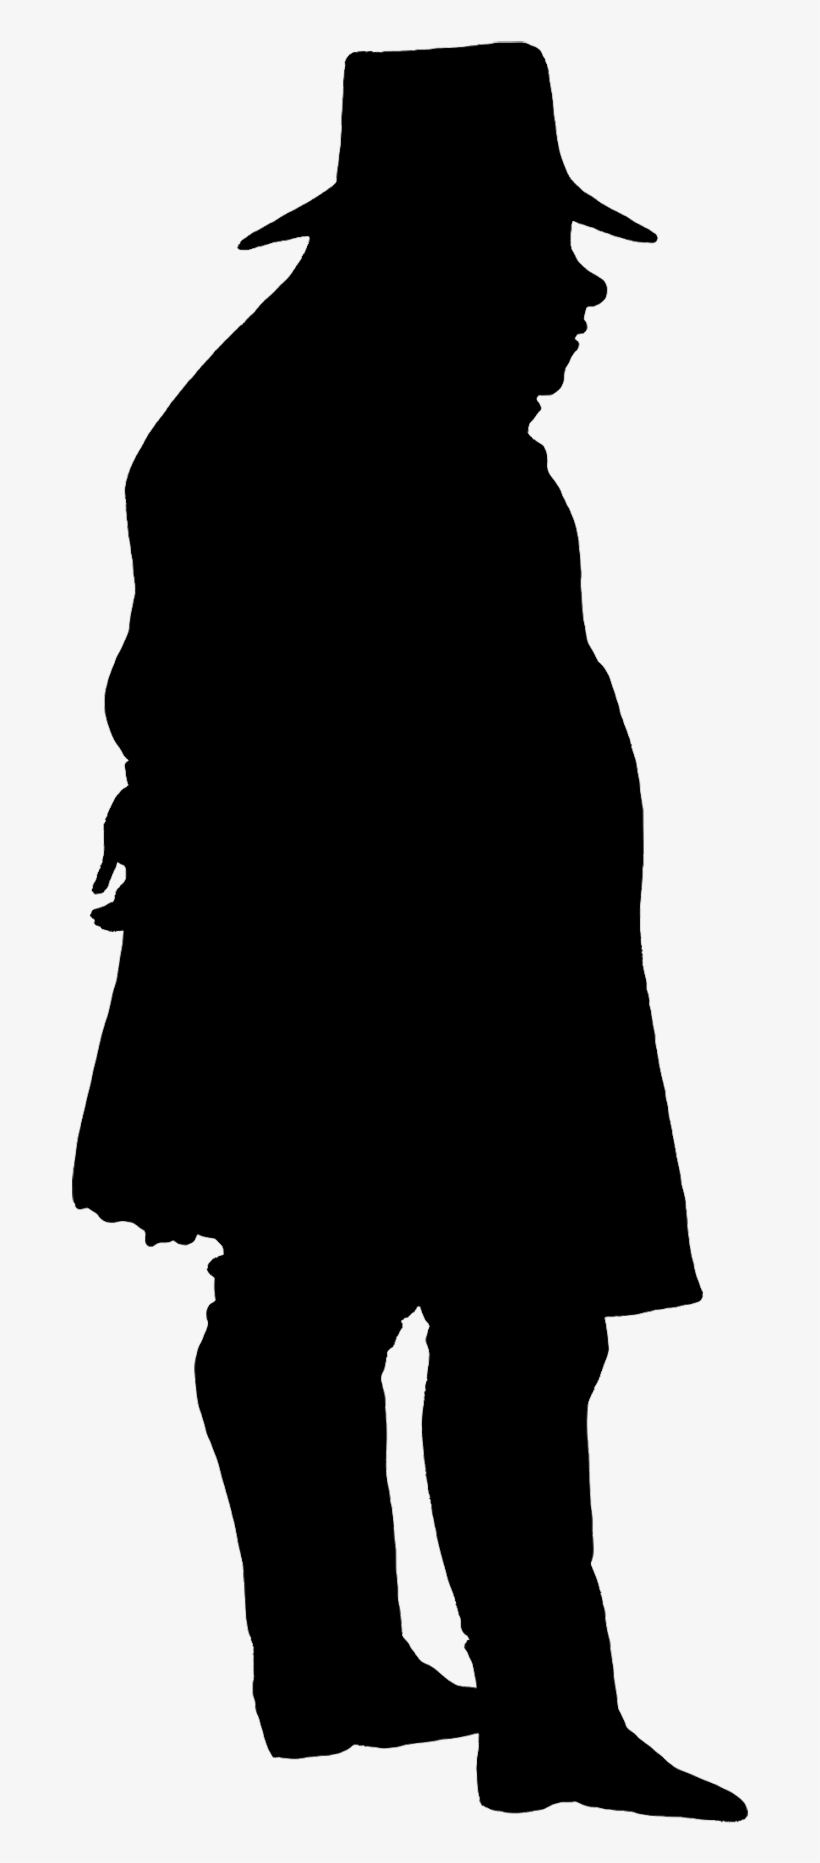 Pin By ʍσʮɳʈαίη Ɗѡεʟʟʂ On - Victorian Man Silhouette Png, transparent png #411326